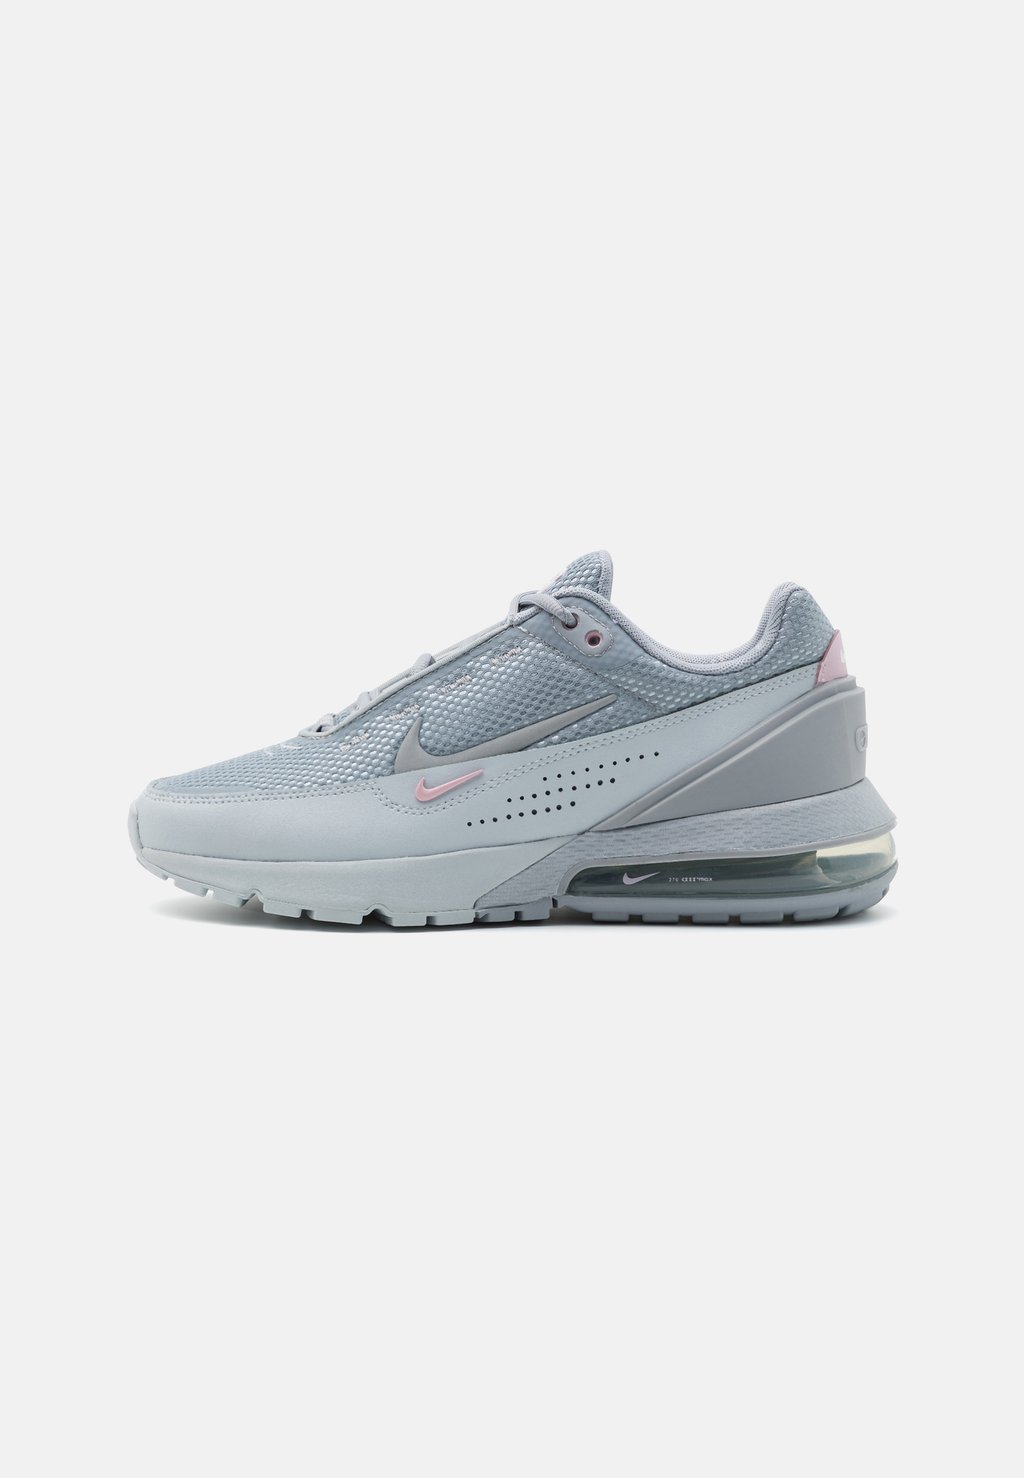 Низкие кроссовки Air Max Pulse Nike, цвет wolf grey/pink foam/pure platinum/white/metallic silver/reflect silver 2090 running shoes mens trainers womens chaussures wolf grey black grape pure platinum triple white designer sneakers sports